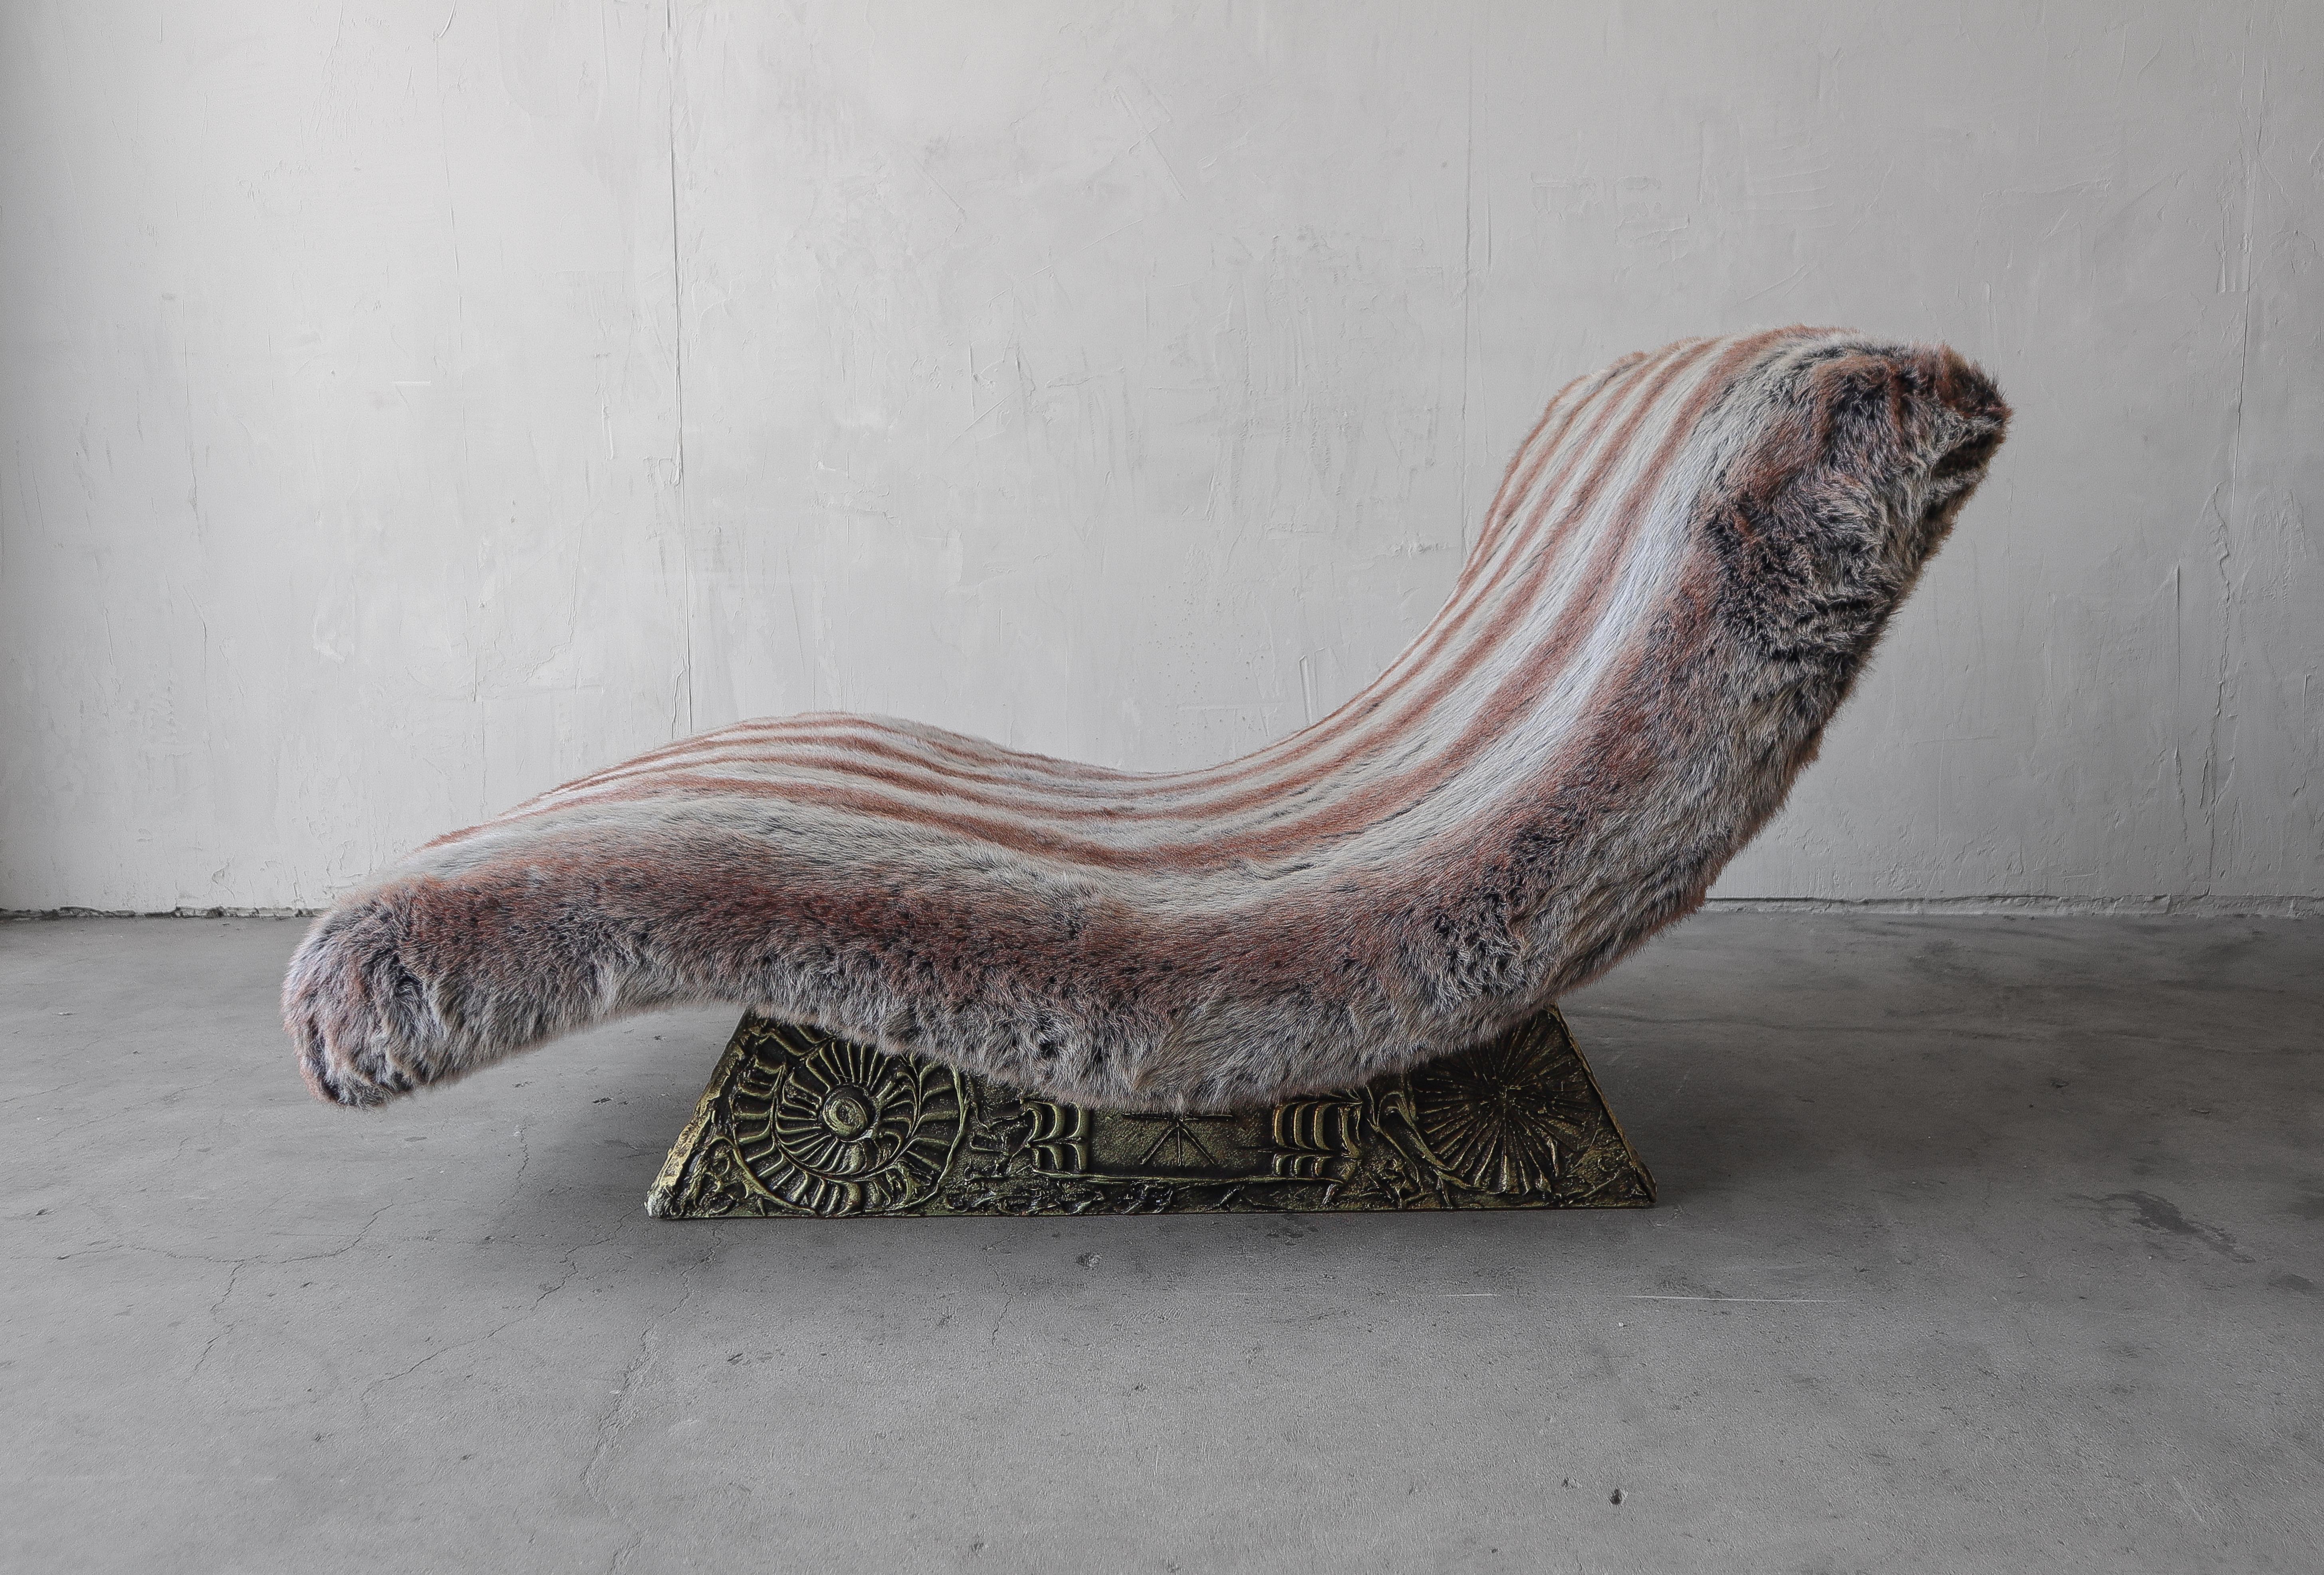 Rarely seen midcentury Brutalist chaise by Adrian Pearsall, and never in this pristine condition. The bronze tone, molded resin creates dimensional interest. 

The chaise is in excellent condition. Freshly recovered in a faux fur by Joseph